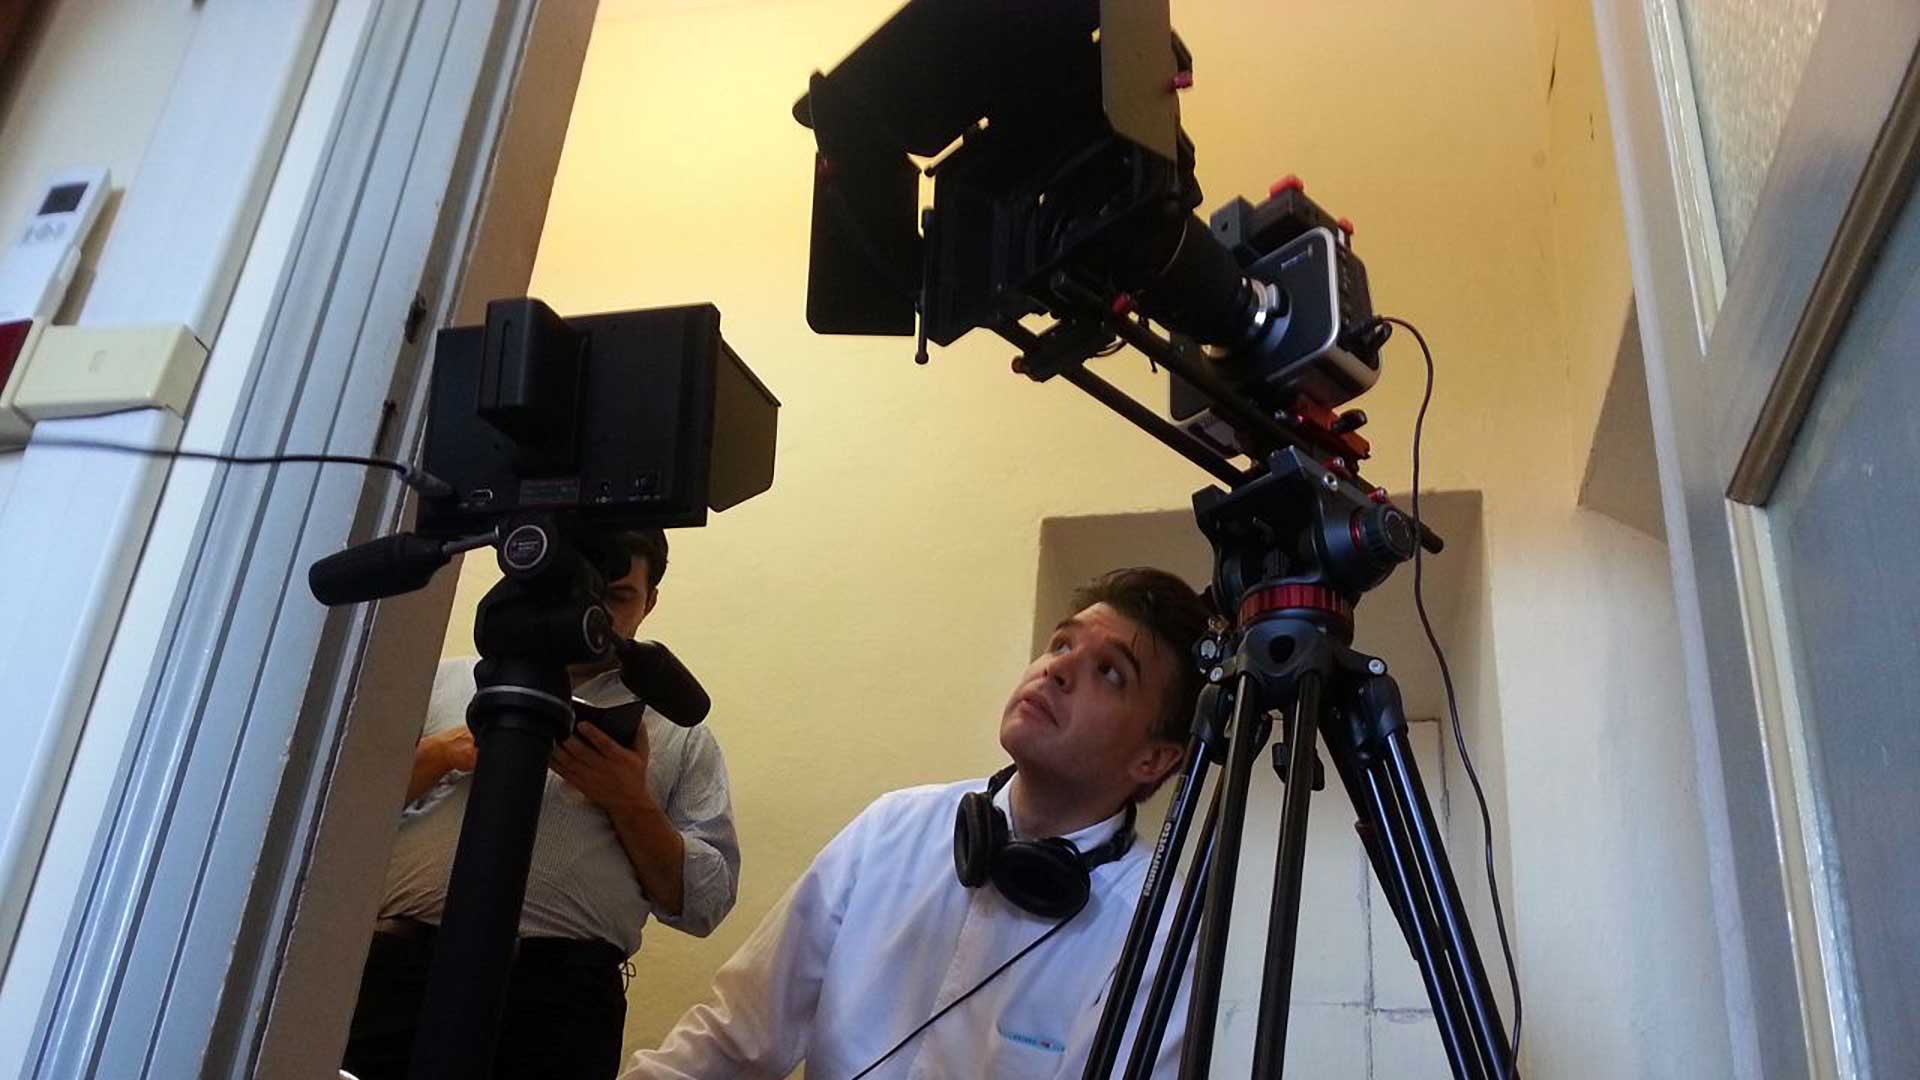 Gian Guido Zurli on the set of The Red Box - DOPPELGANGER Episode 2 (2016).